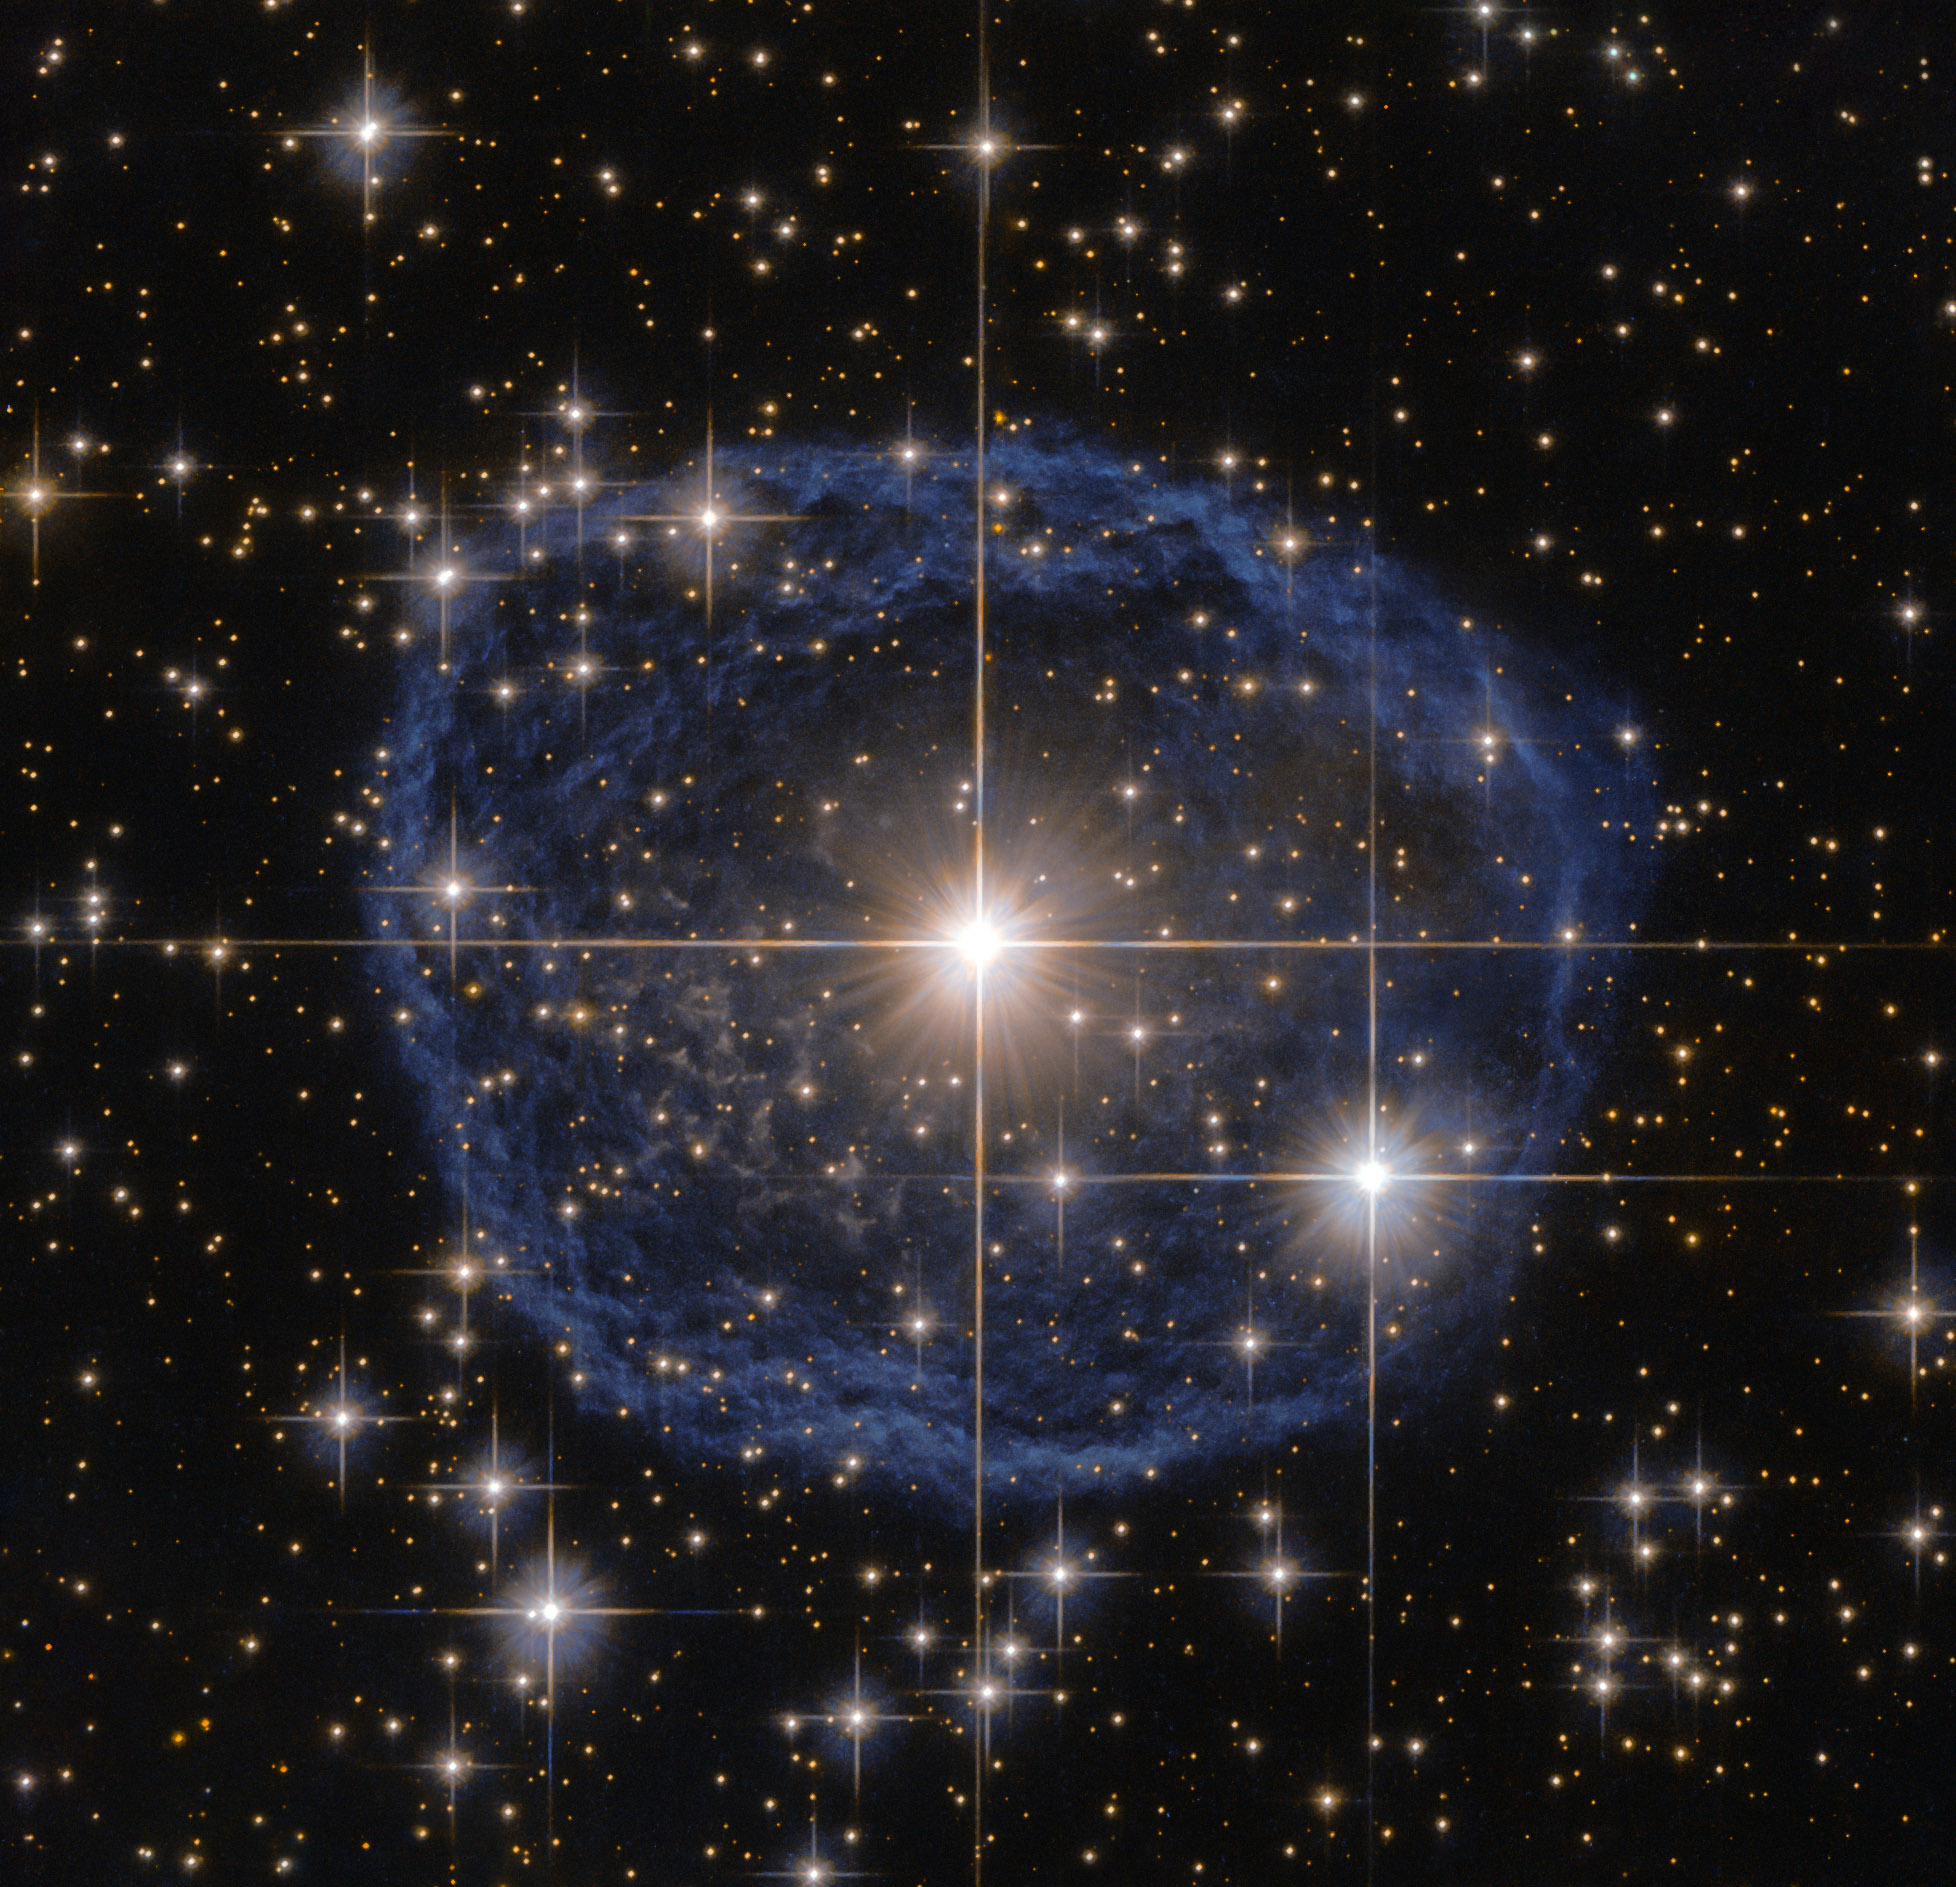 A Wolf–Rayet star, known as WR 31a, located about 30 000 light-years away in the constellation of Carina (The Keel), Feb. 22, 2016.